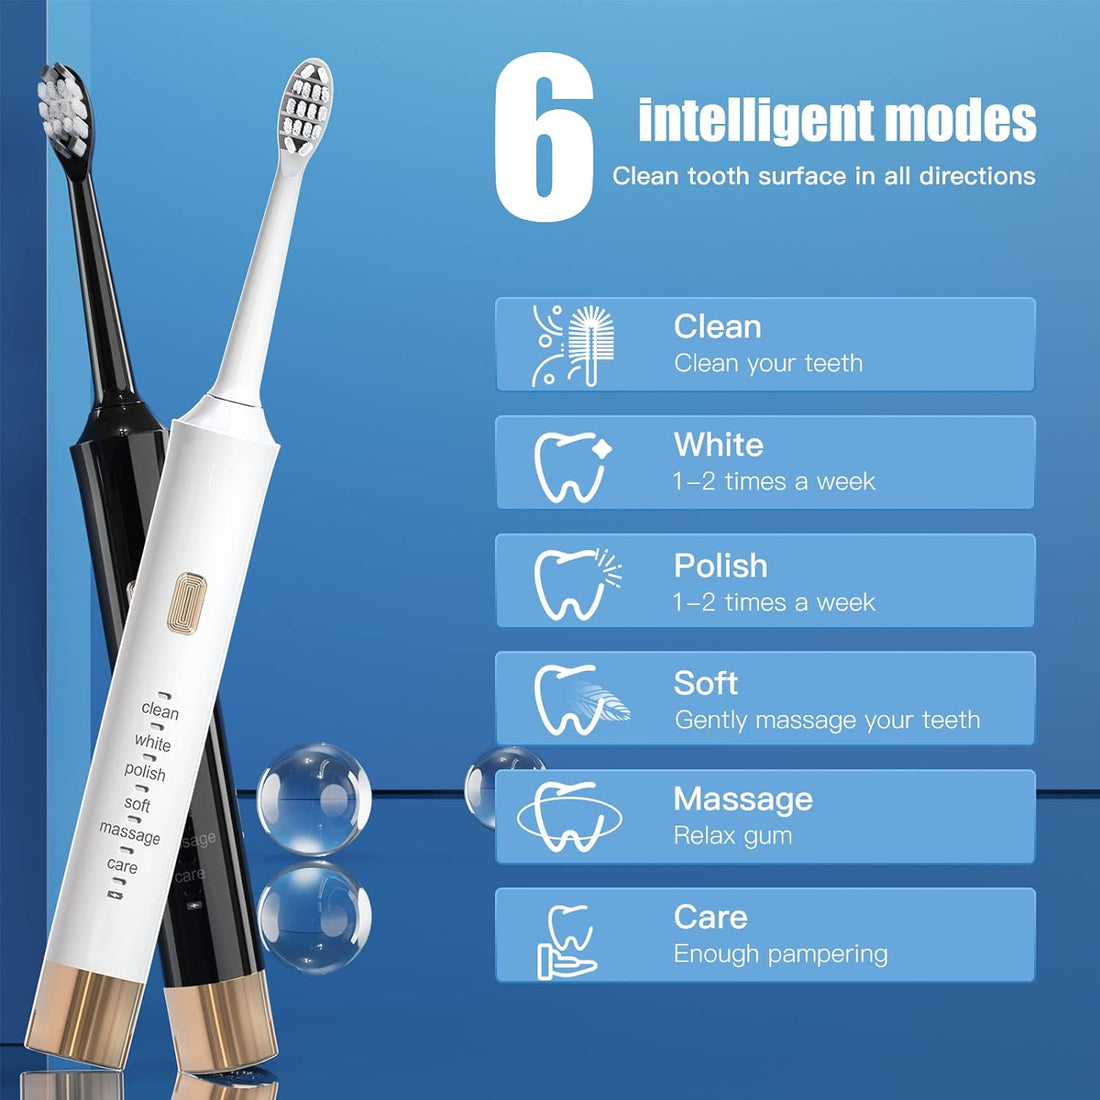 2 Pieces, Black & White Set Electric Toothbrush, Dual Handle 38000 VPM Electric Toothbrush - 6 Modes w/ Smart Timer - Includes 12 Dupont Brush Heads,ipx7 Waterproof